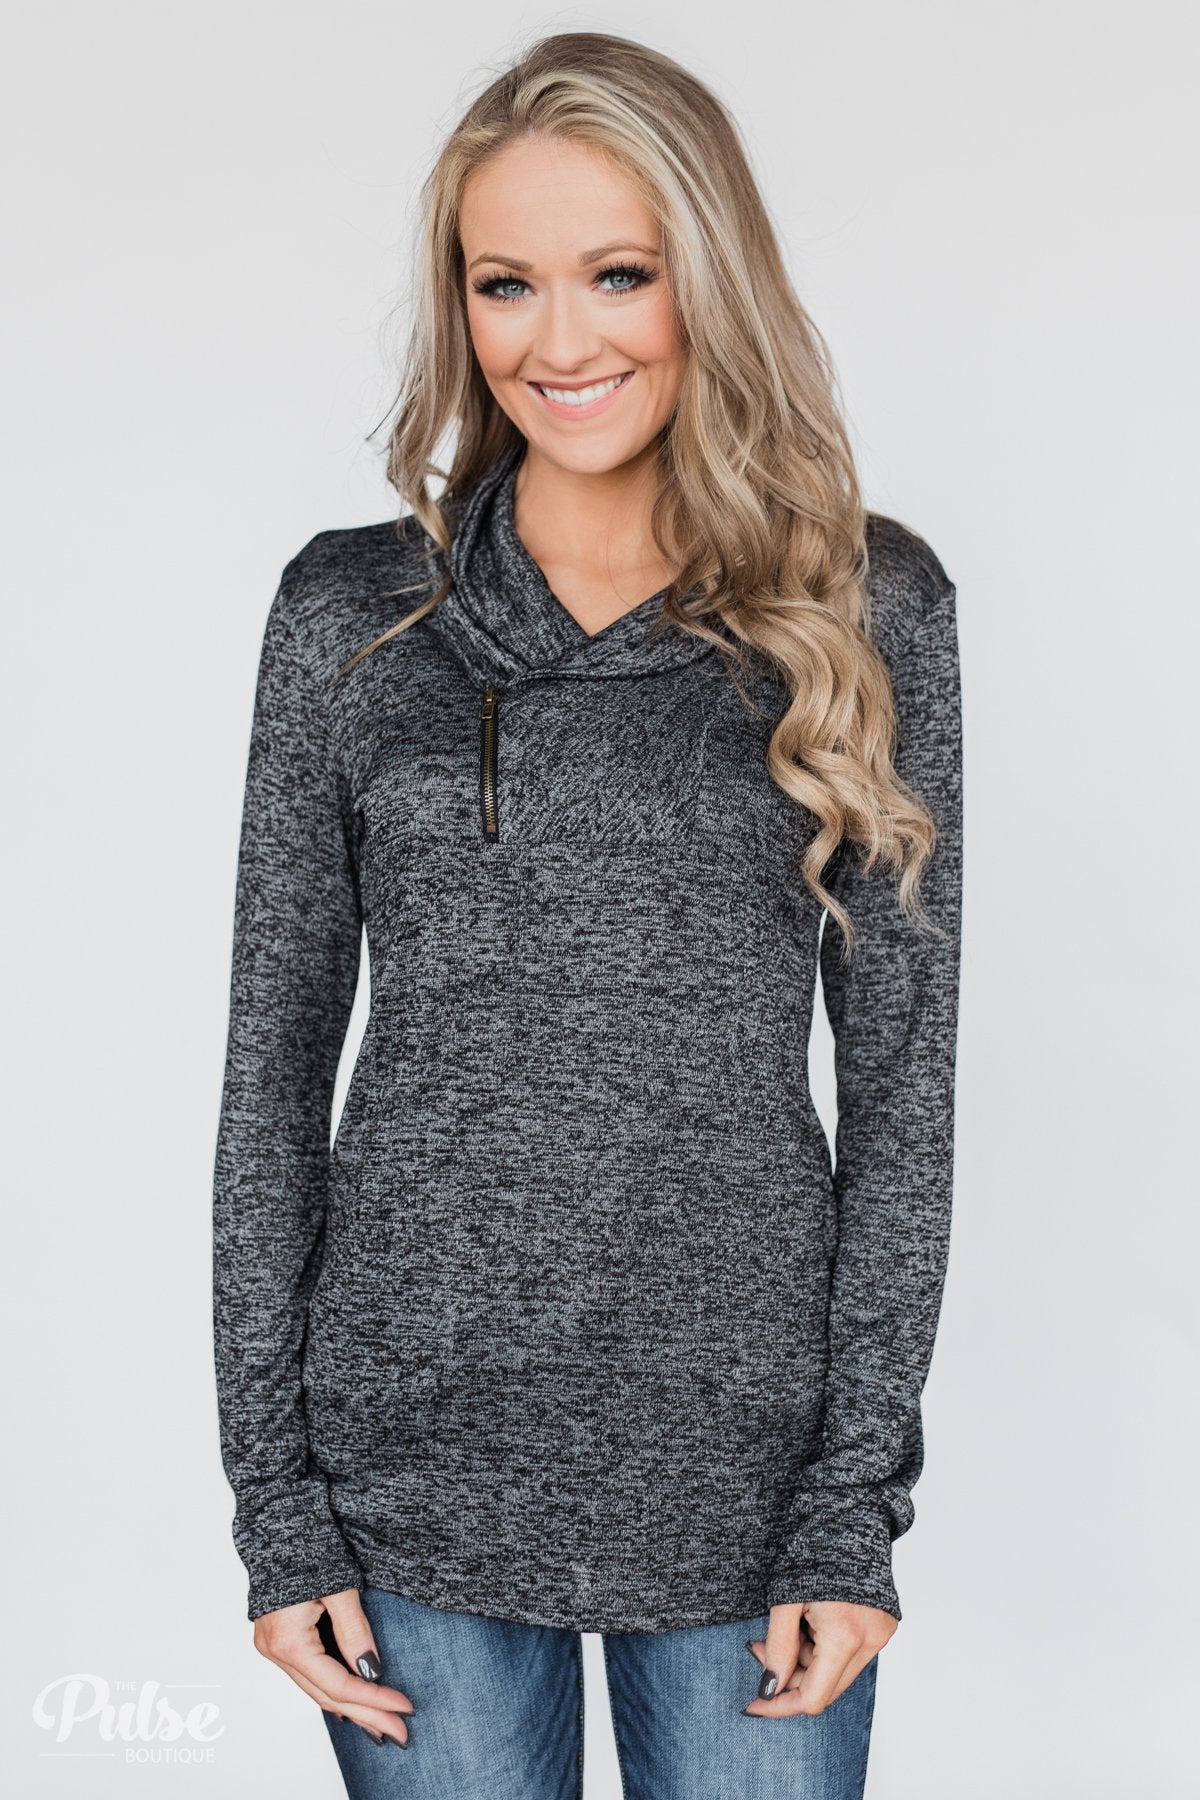 All This Time Zipper Pullover Top- Heather Black